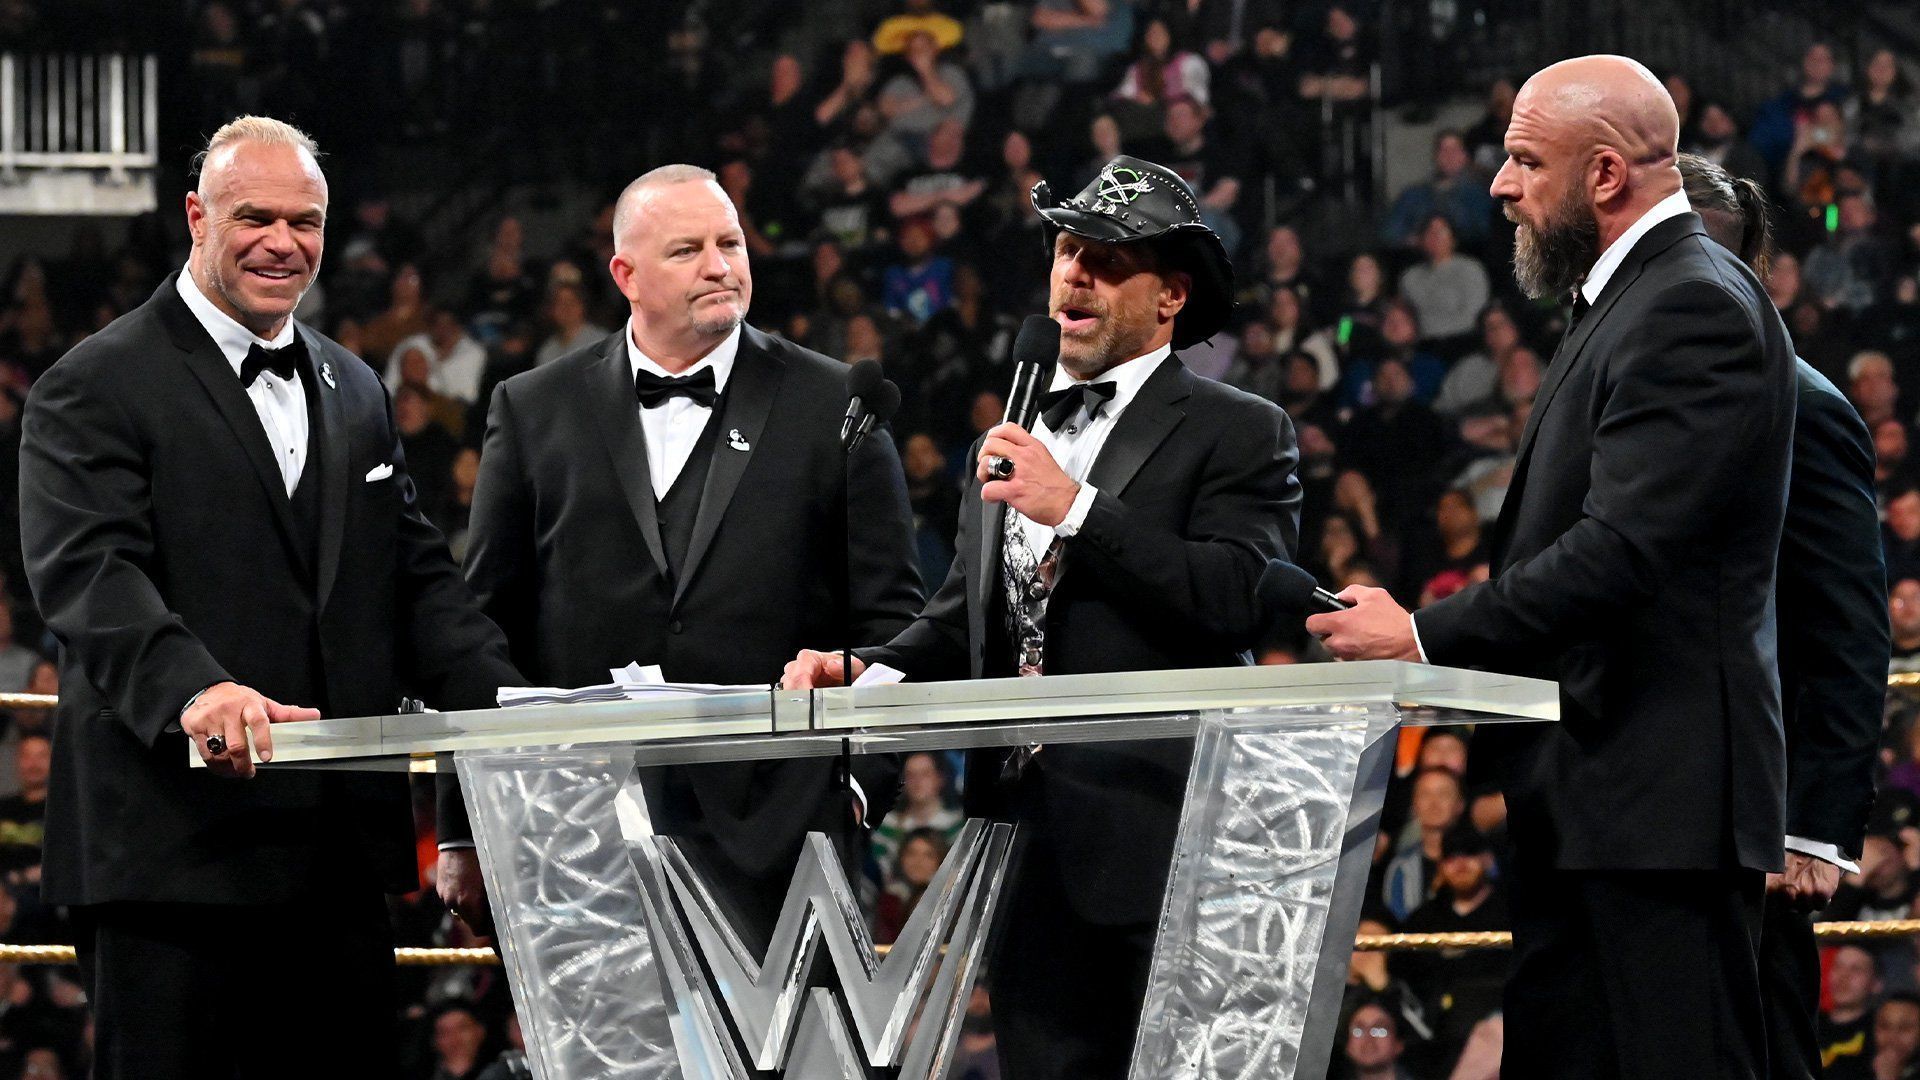 DX is being inducted into the WWE Hall of Fame